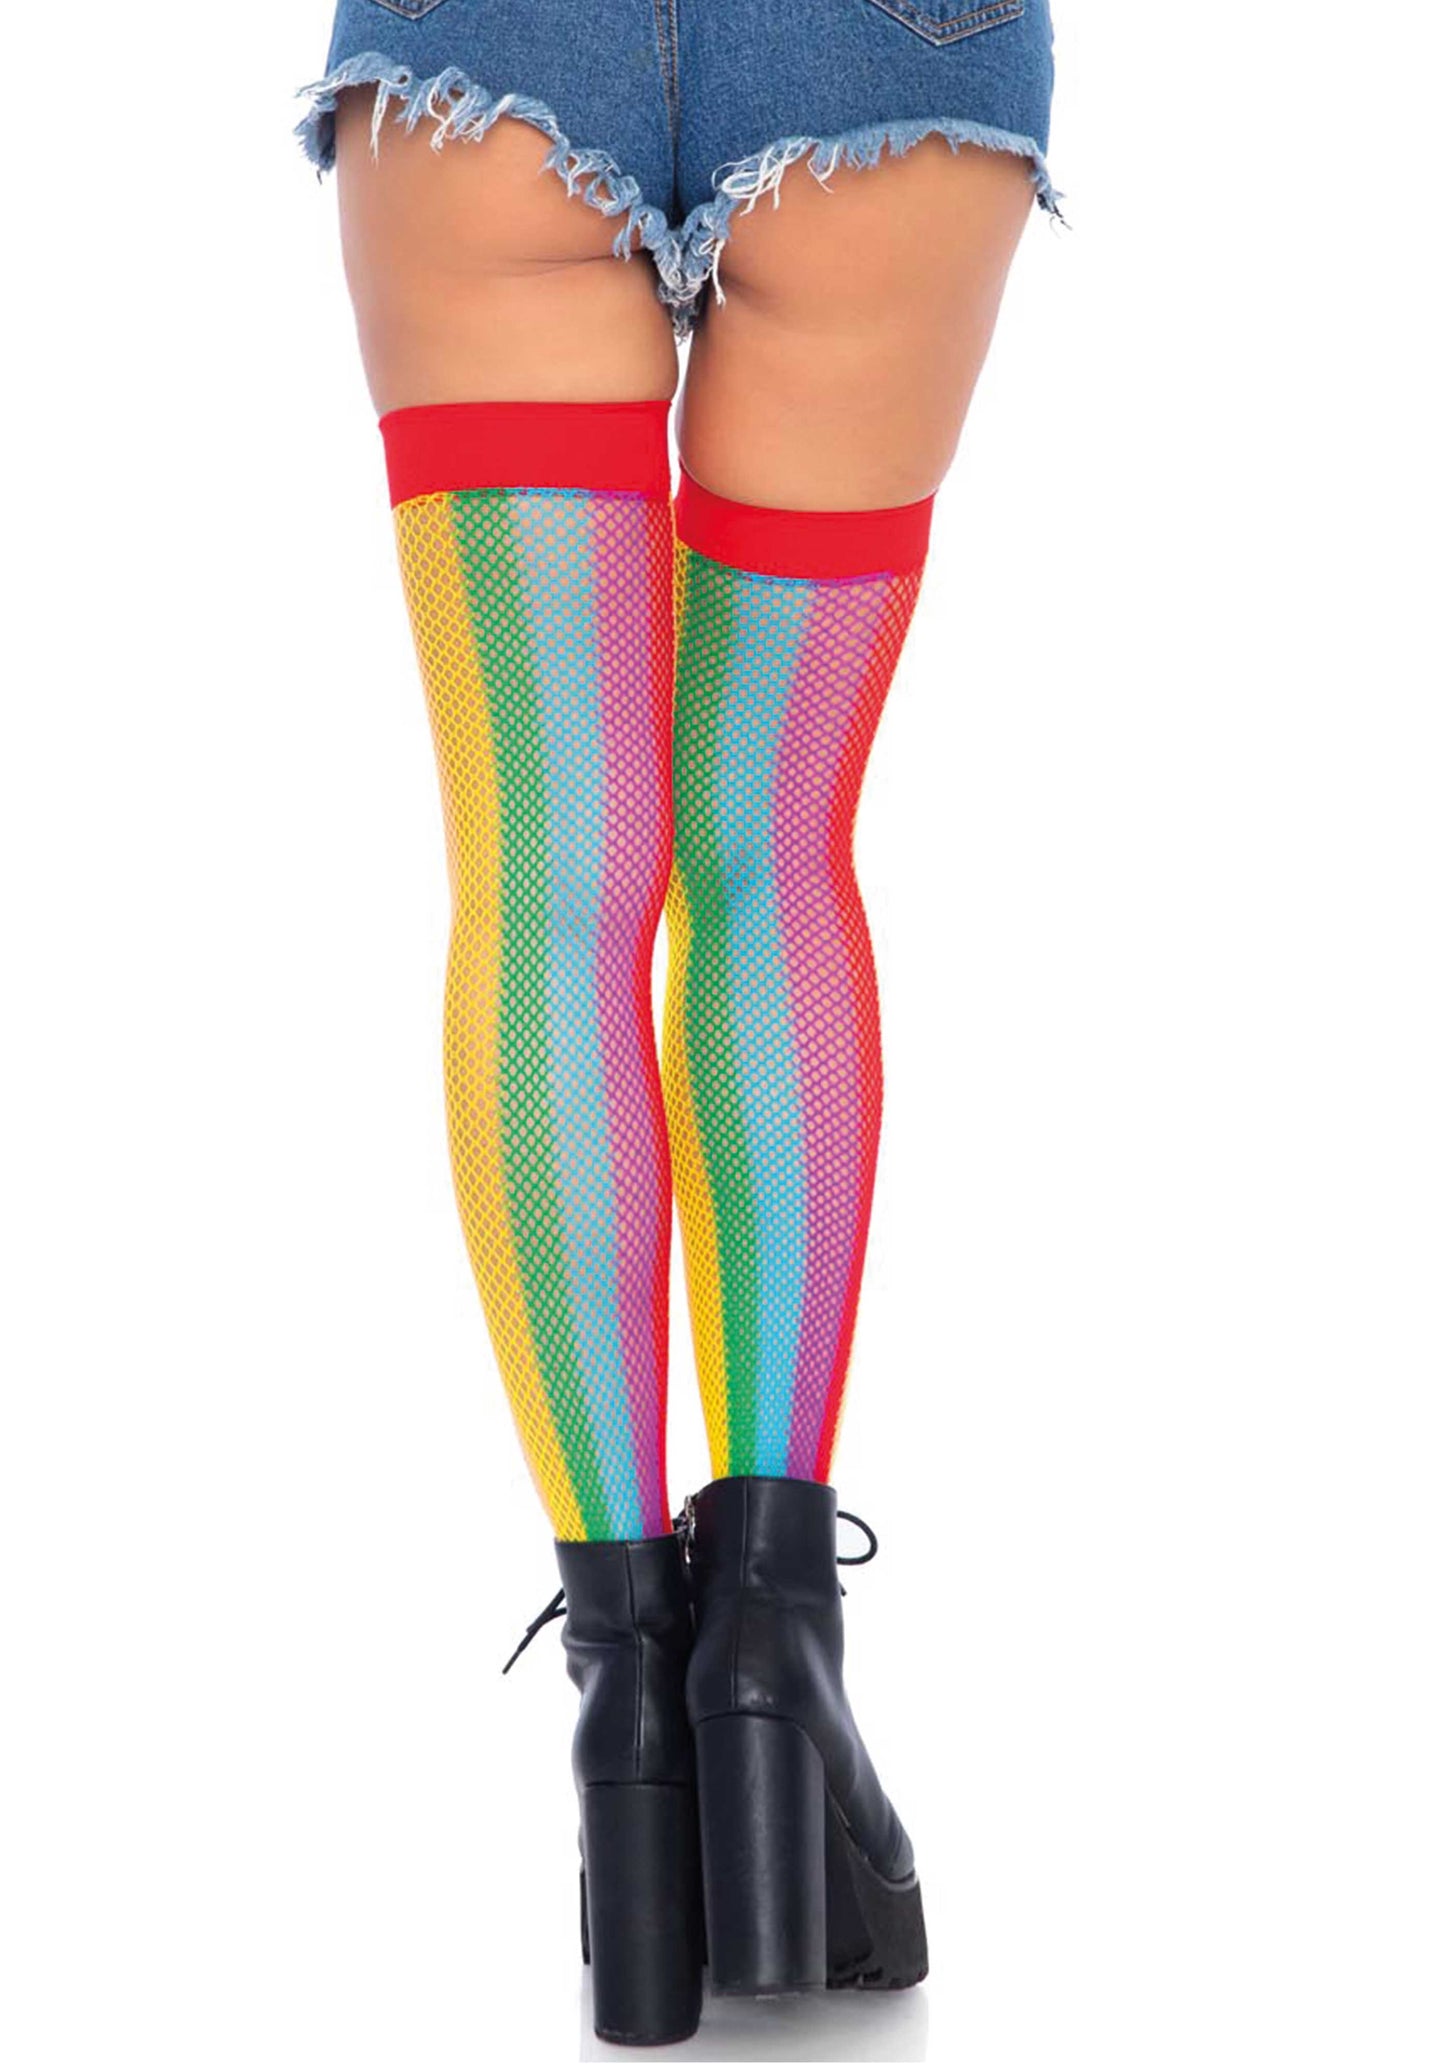 Leg Avenue 9290 Rainbow Fishnet Thigh Highs - Classic fishnet thigh high socks with vertical rainbow colour stripes and plain red elasticated top.